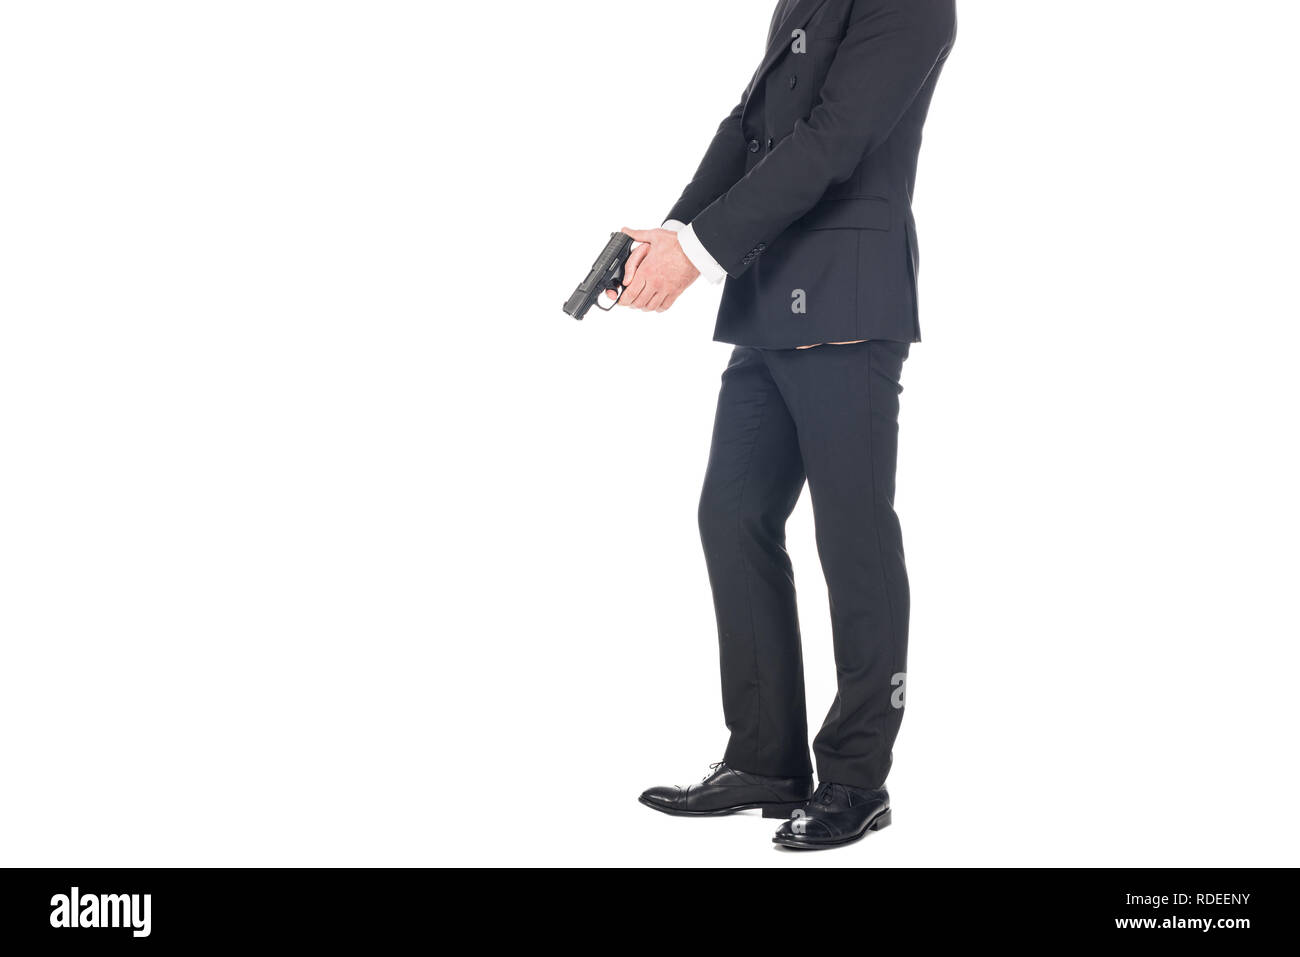 cropped view of killer in black suit holding gun, isolated on white ...